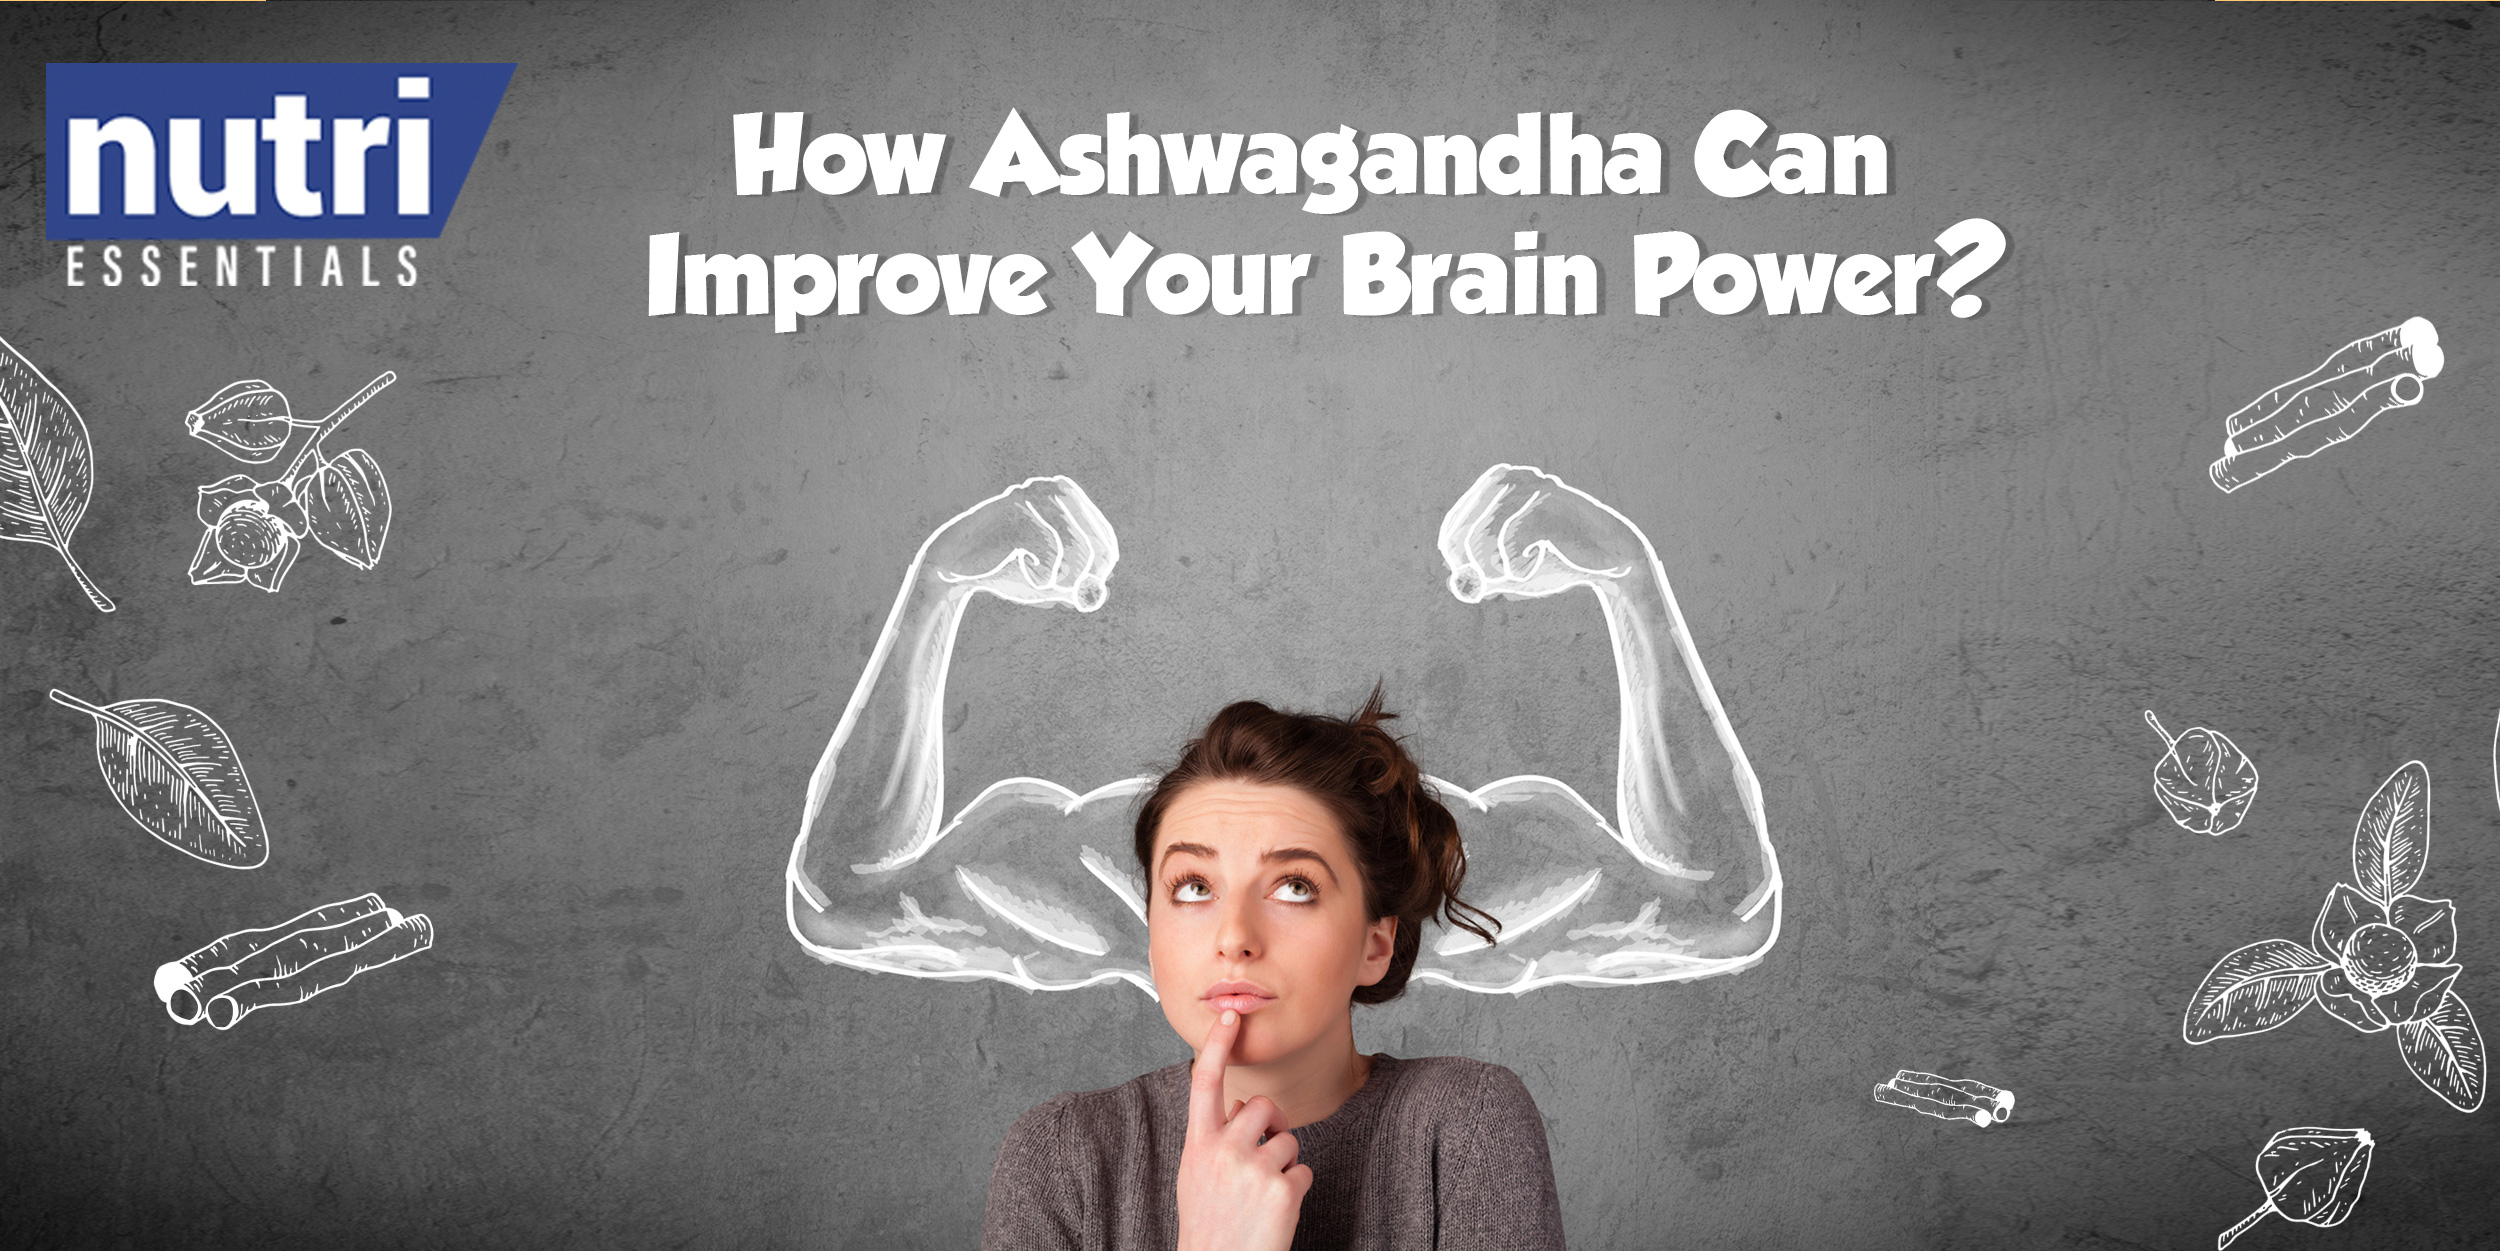 HOW CAN ASHWAGANDHA IMPROVE YOUR BRAINPOWER?